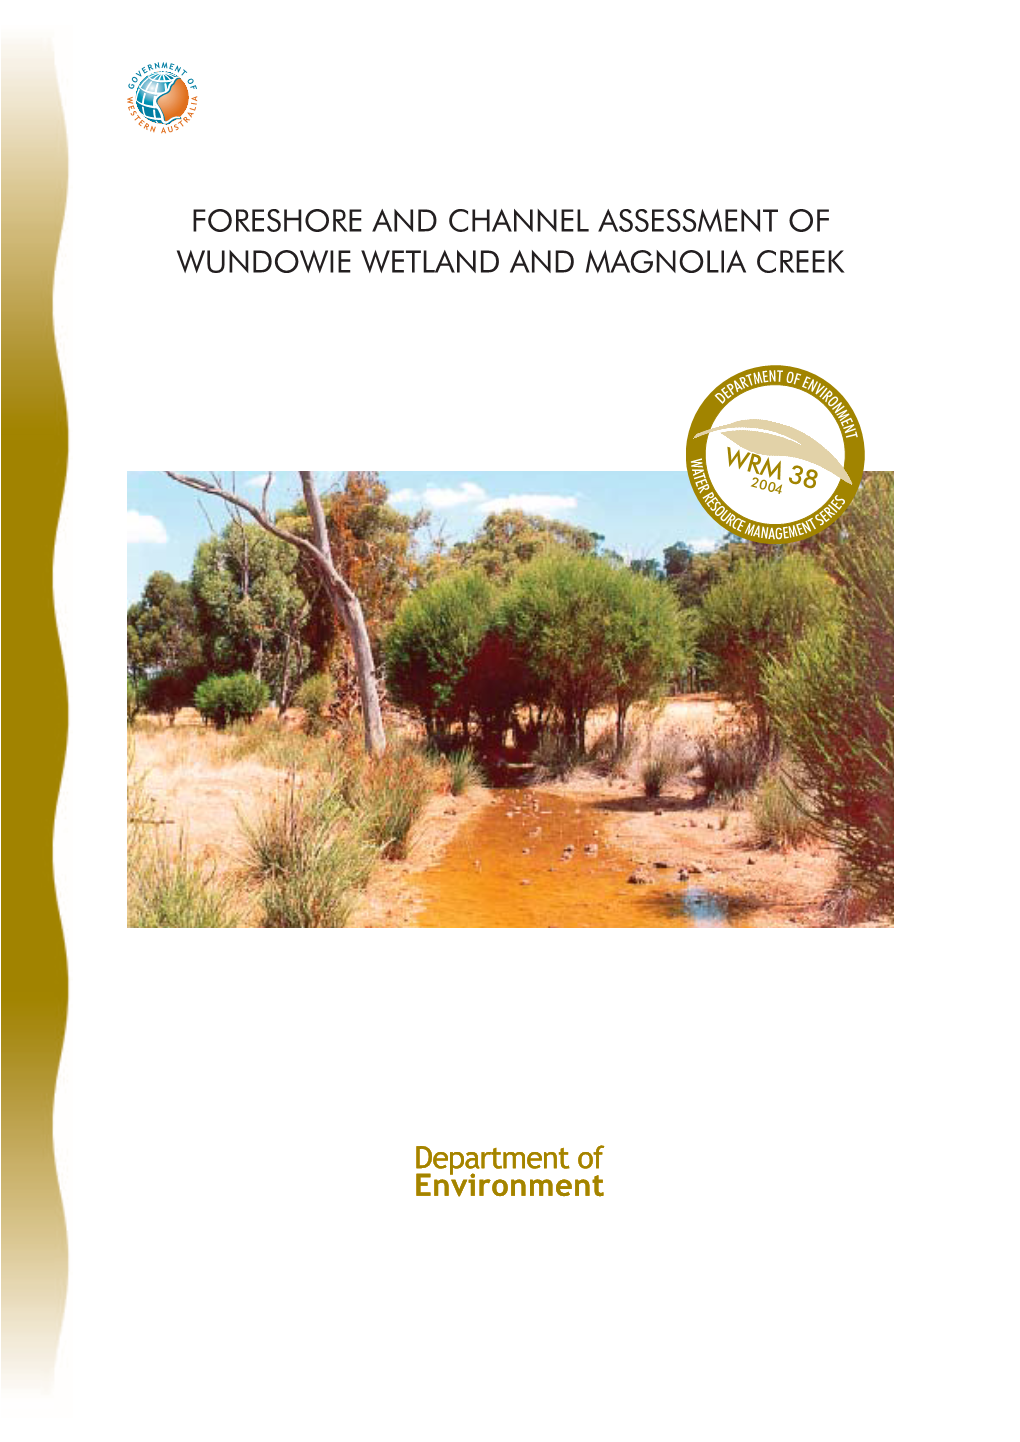 Foreshore and Channel Assessment of Wundowie Wetland and Magnolia Creek